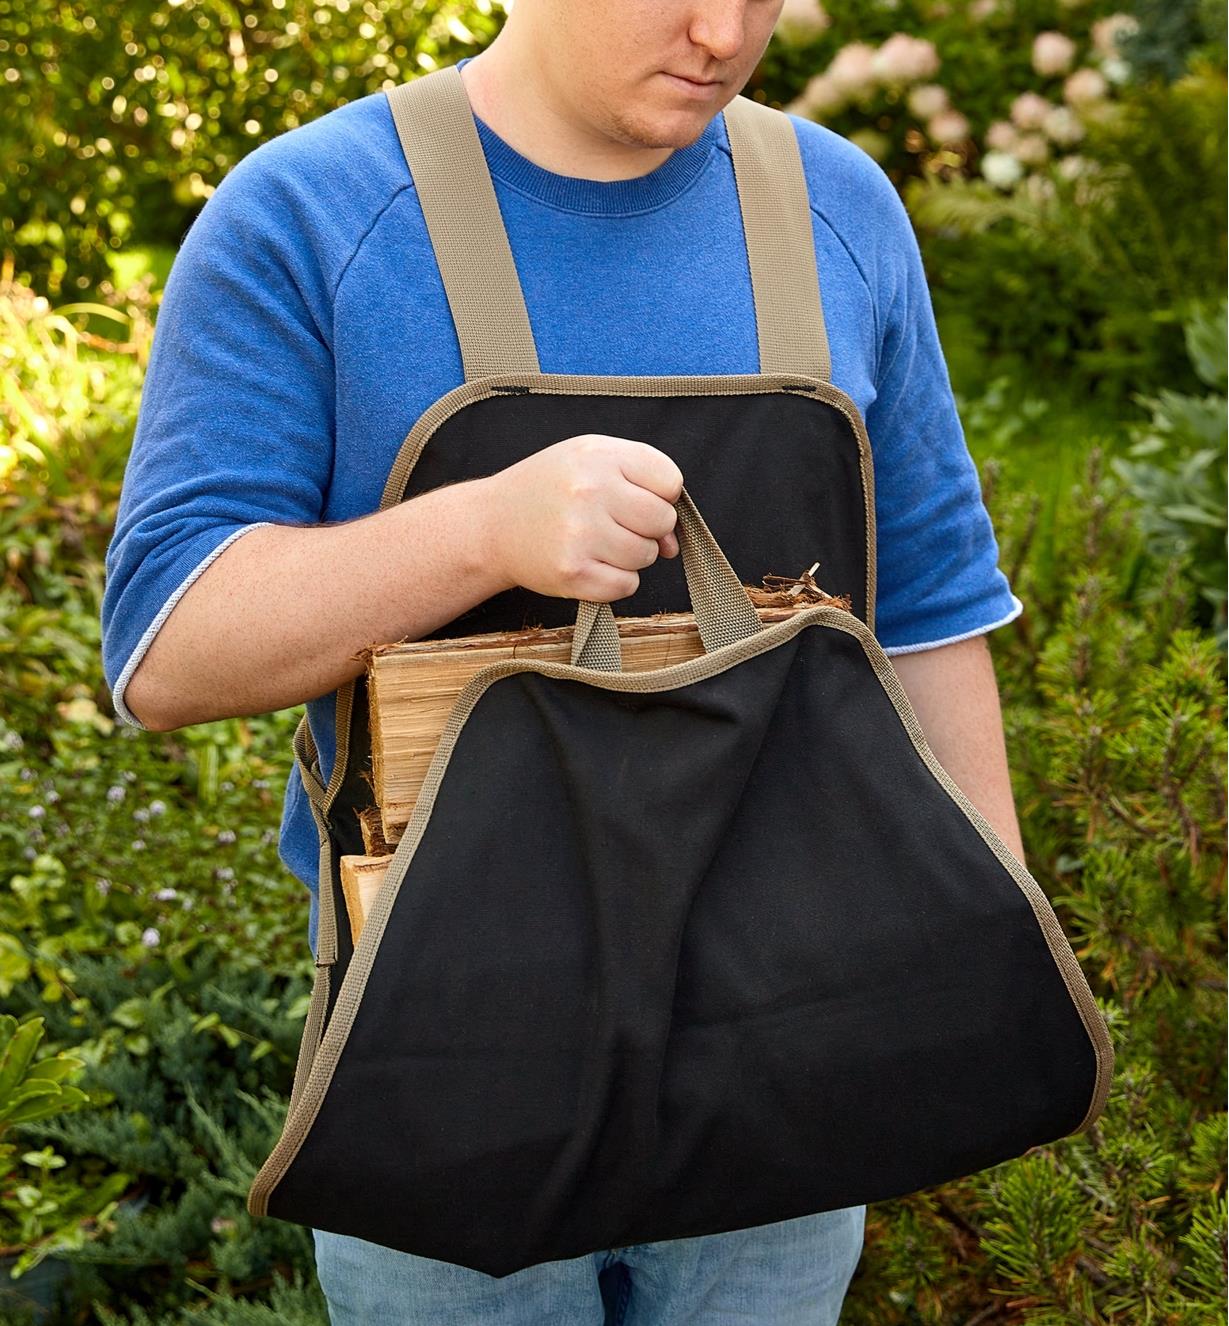 Front view of a man carrying firewood in the apron tote